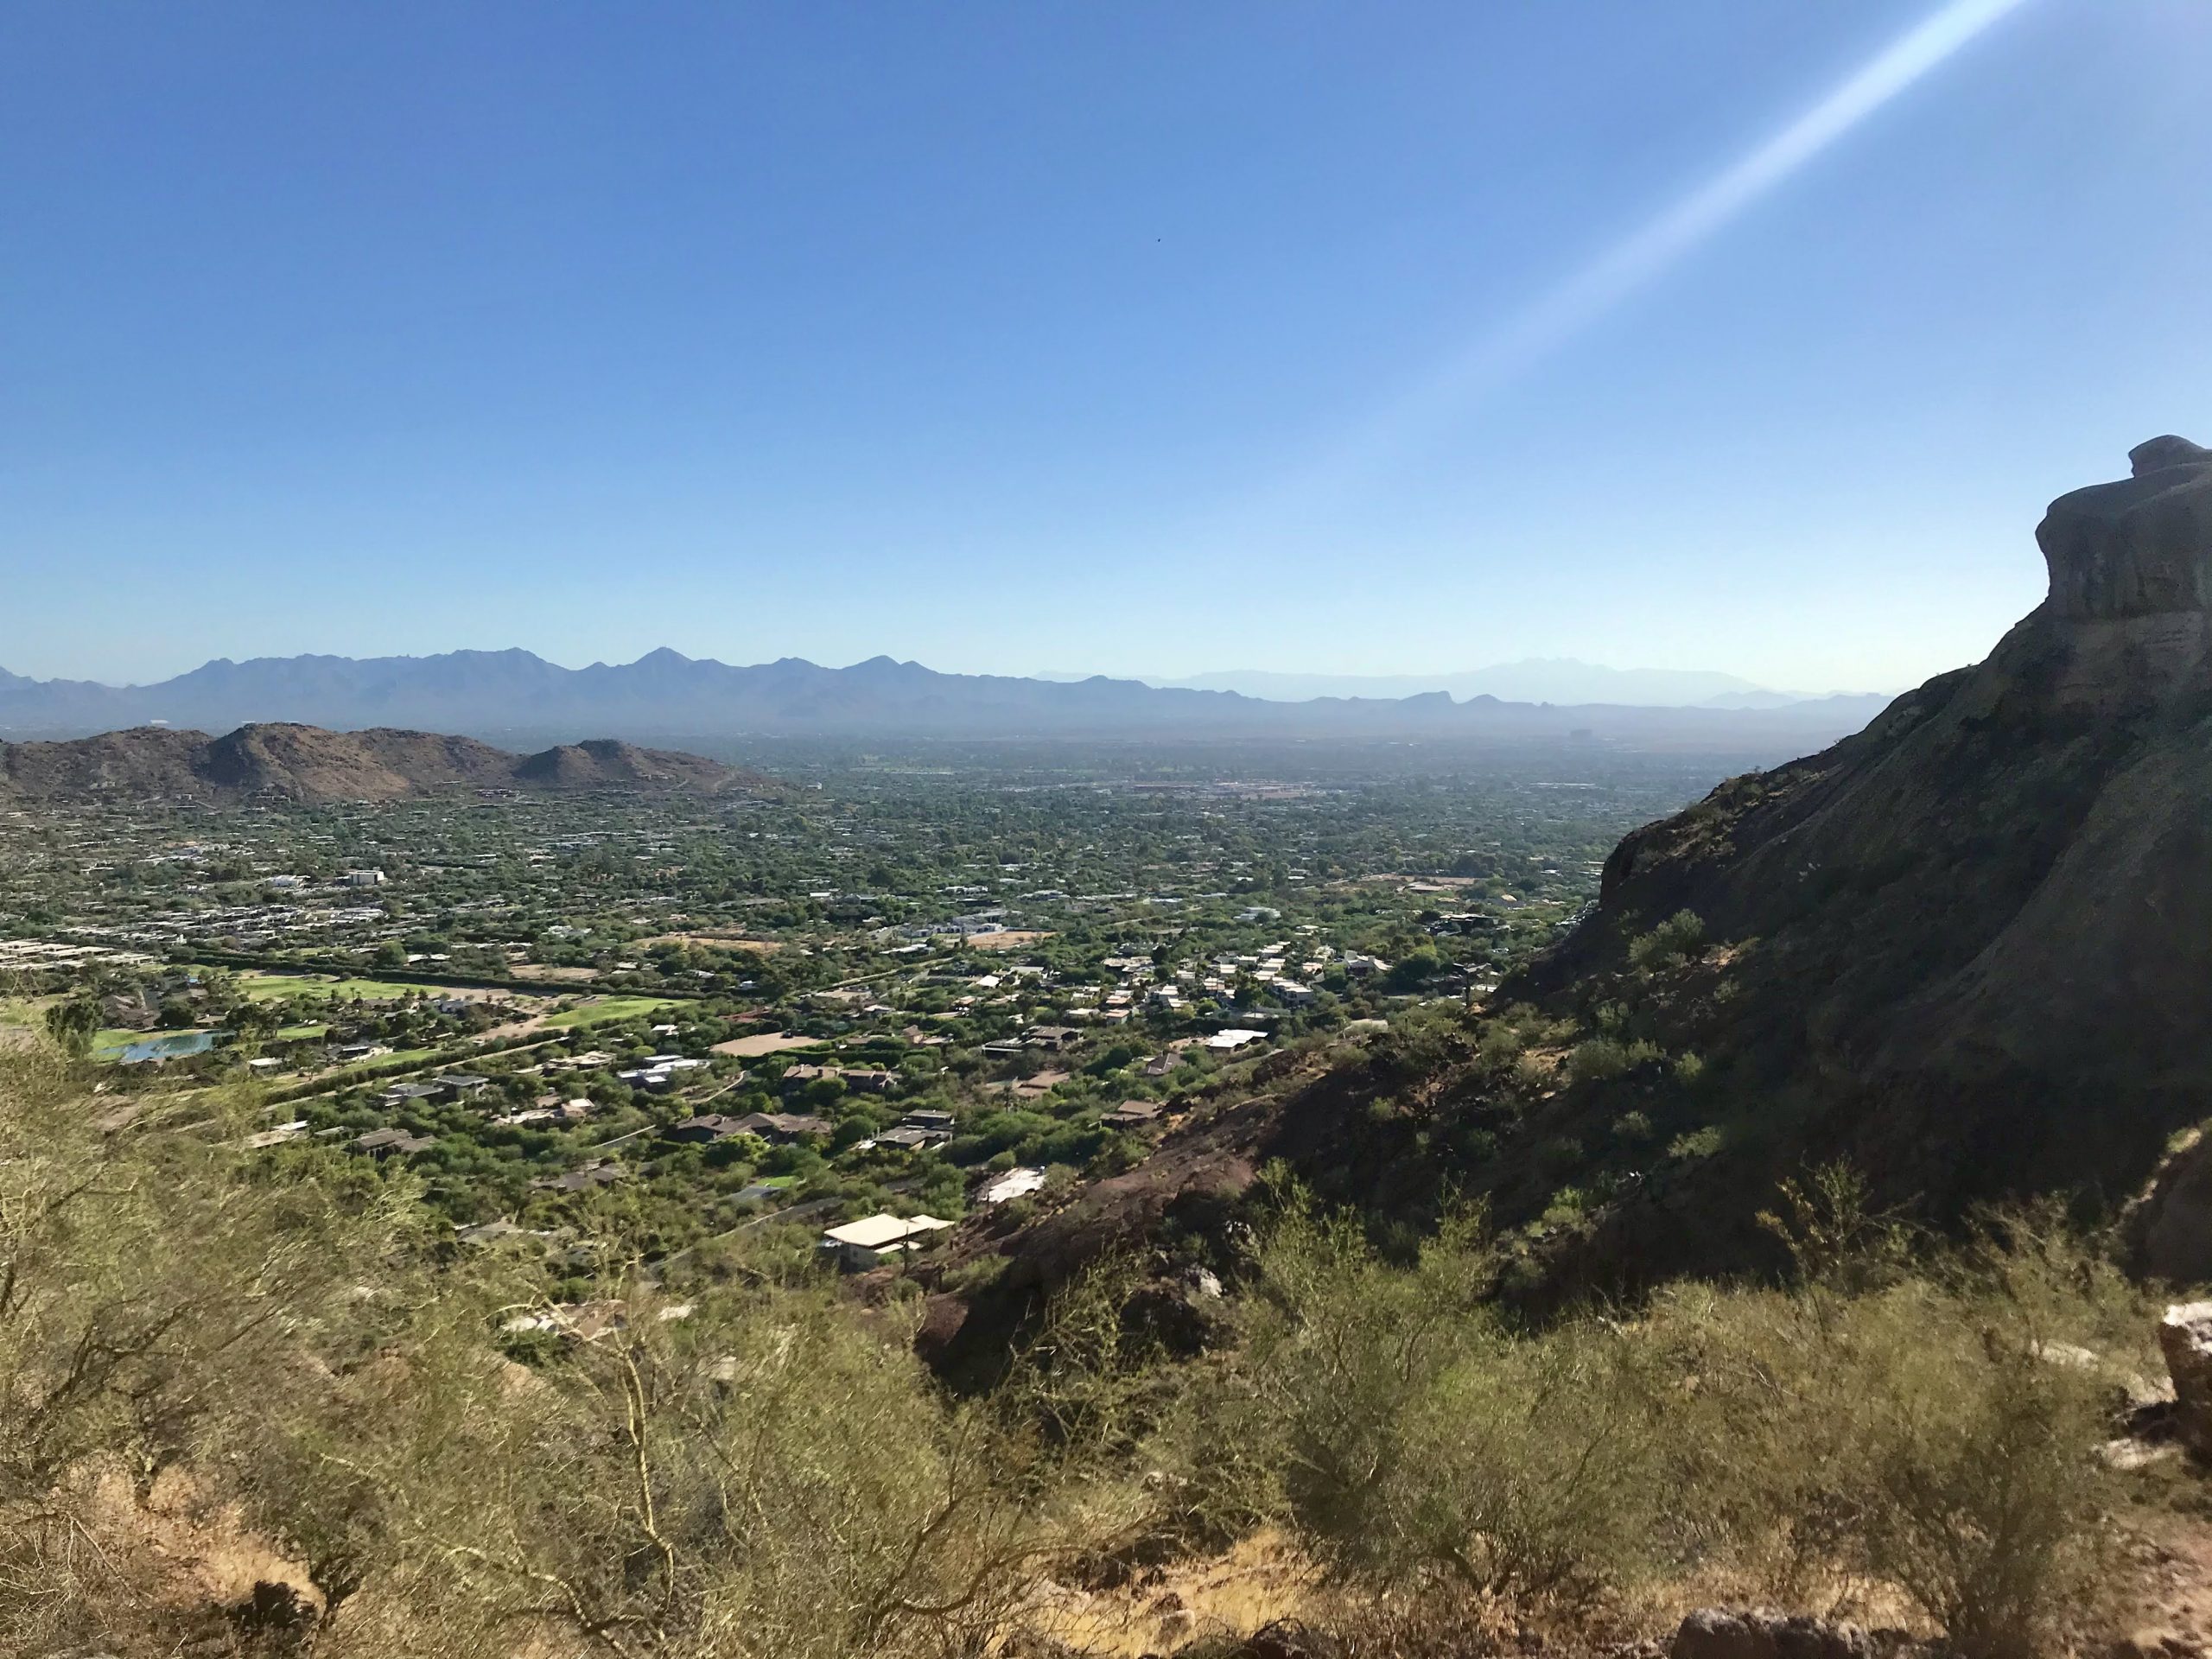 Piestewa vs Camelback? Which should you hike? City views